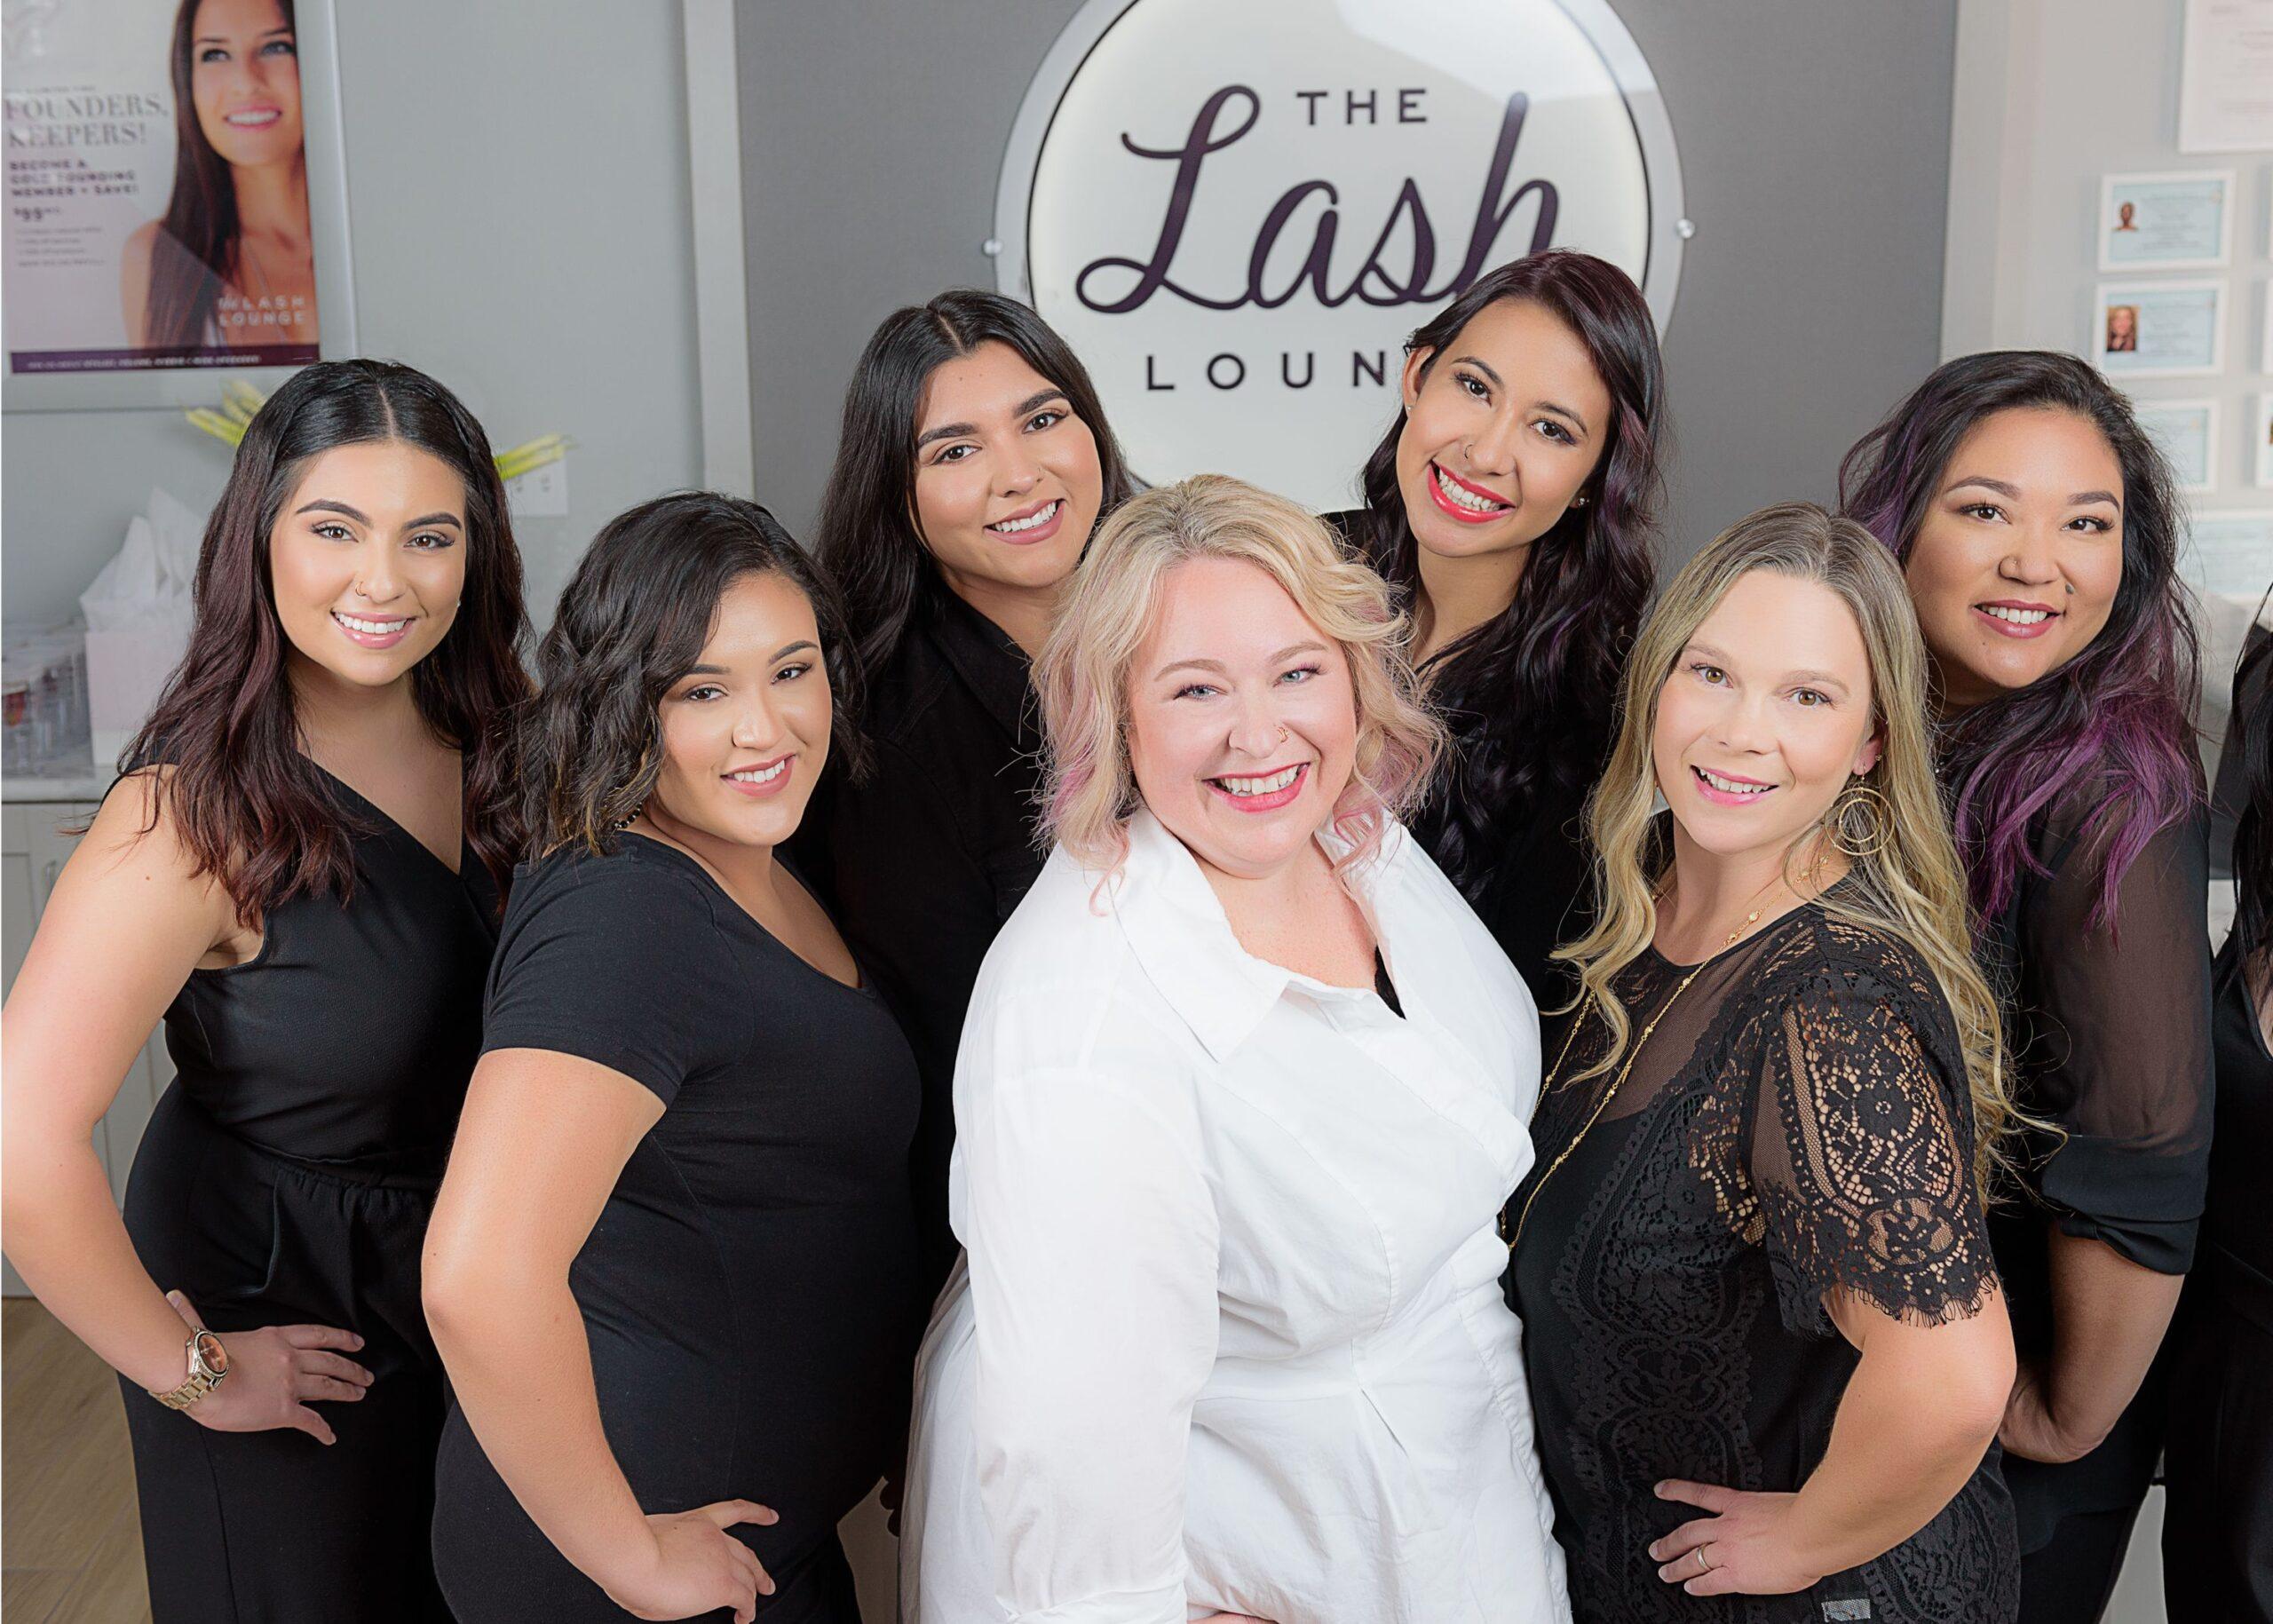 A group of eyelash business owners posing in front of The Lash Lounge franchise.